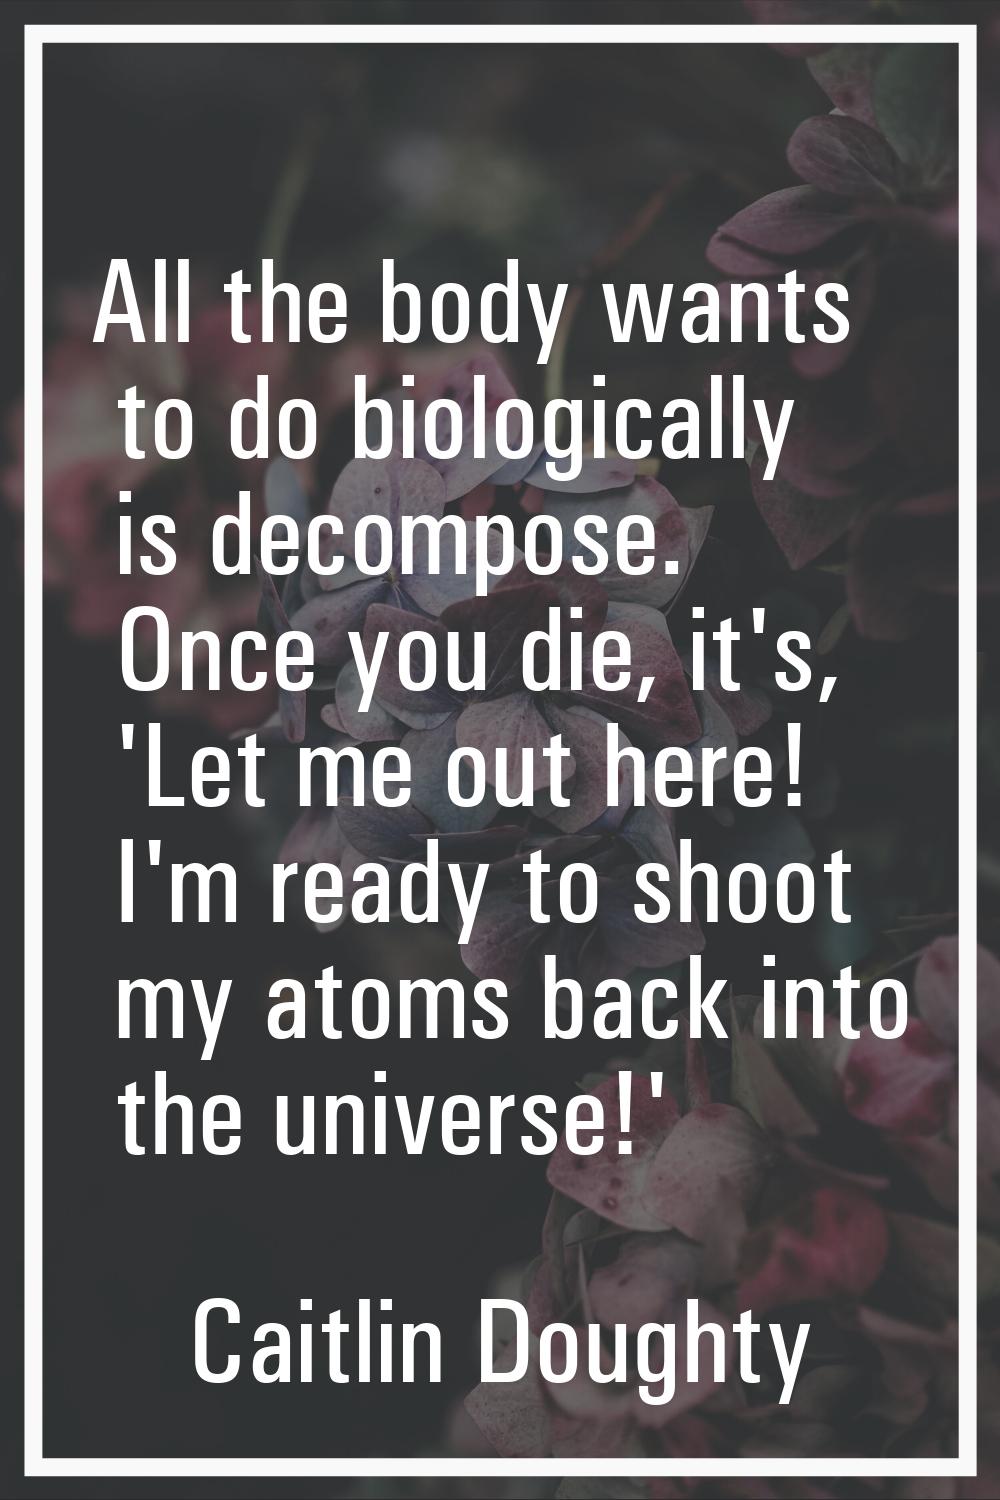 All the body wants to do biologically is decompose. Once you die, it's, 'Let me out here! I'm ready